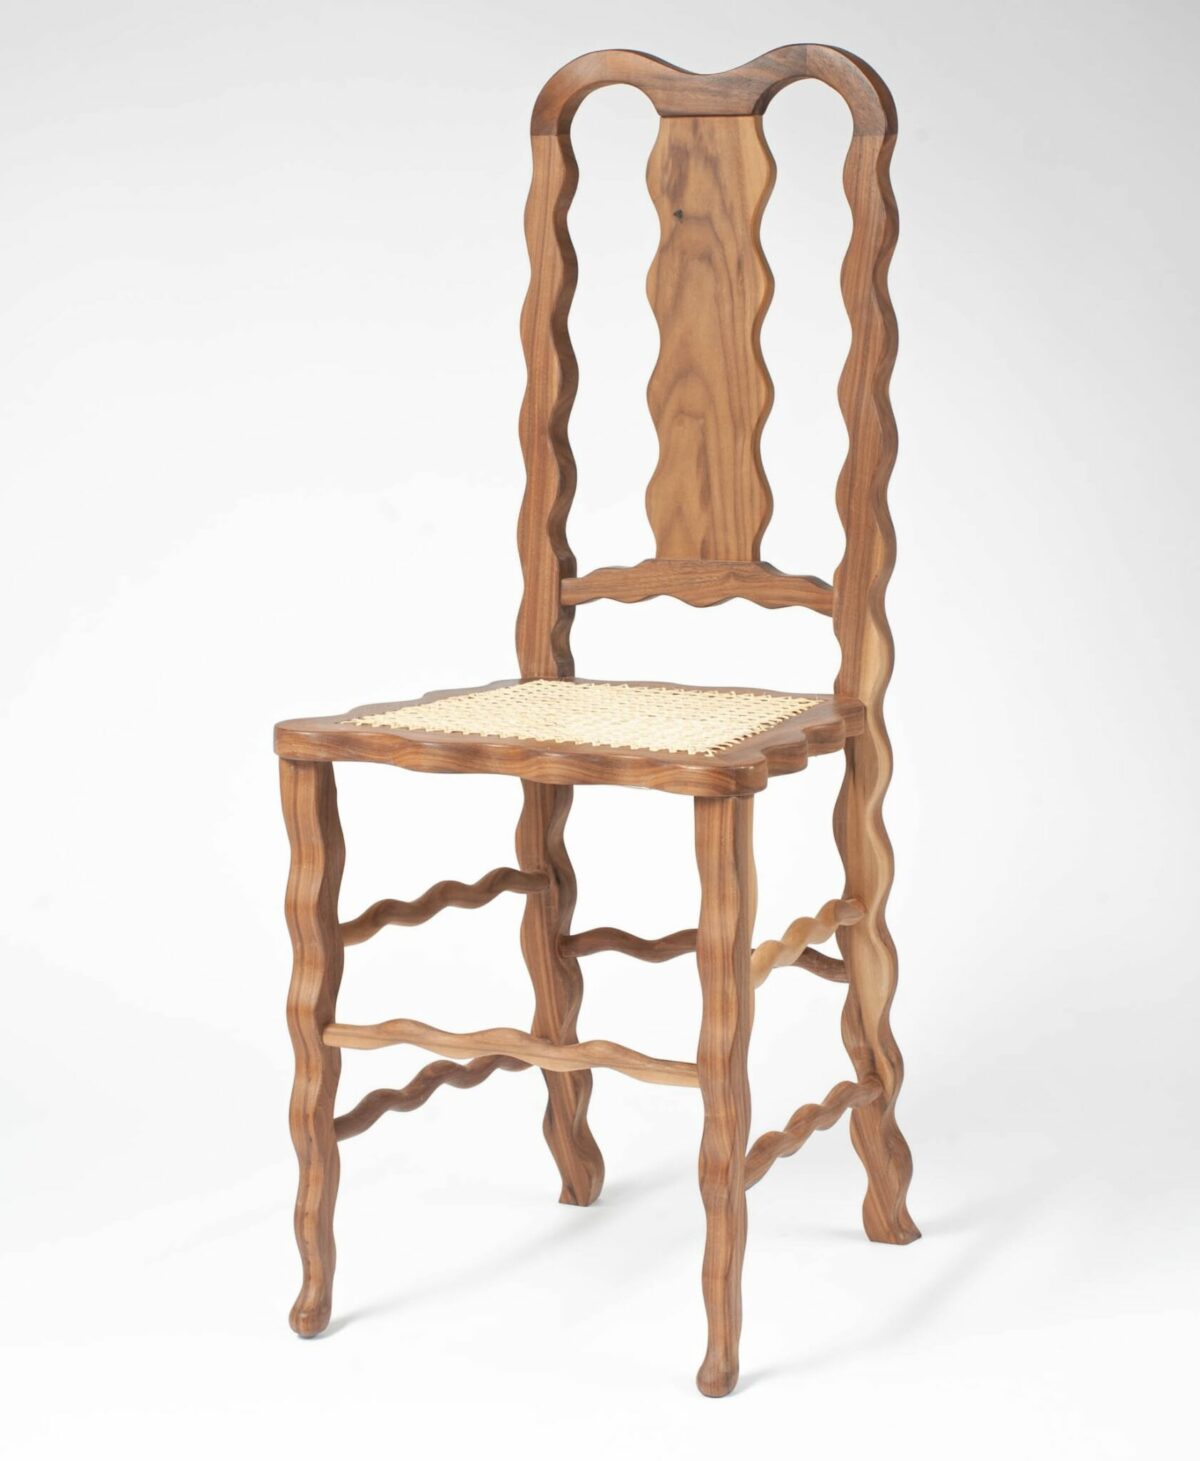 Nervous Chairs Amusing Furniture By Wilkinson Rivera 8